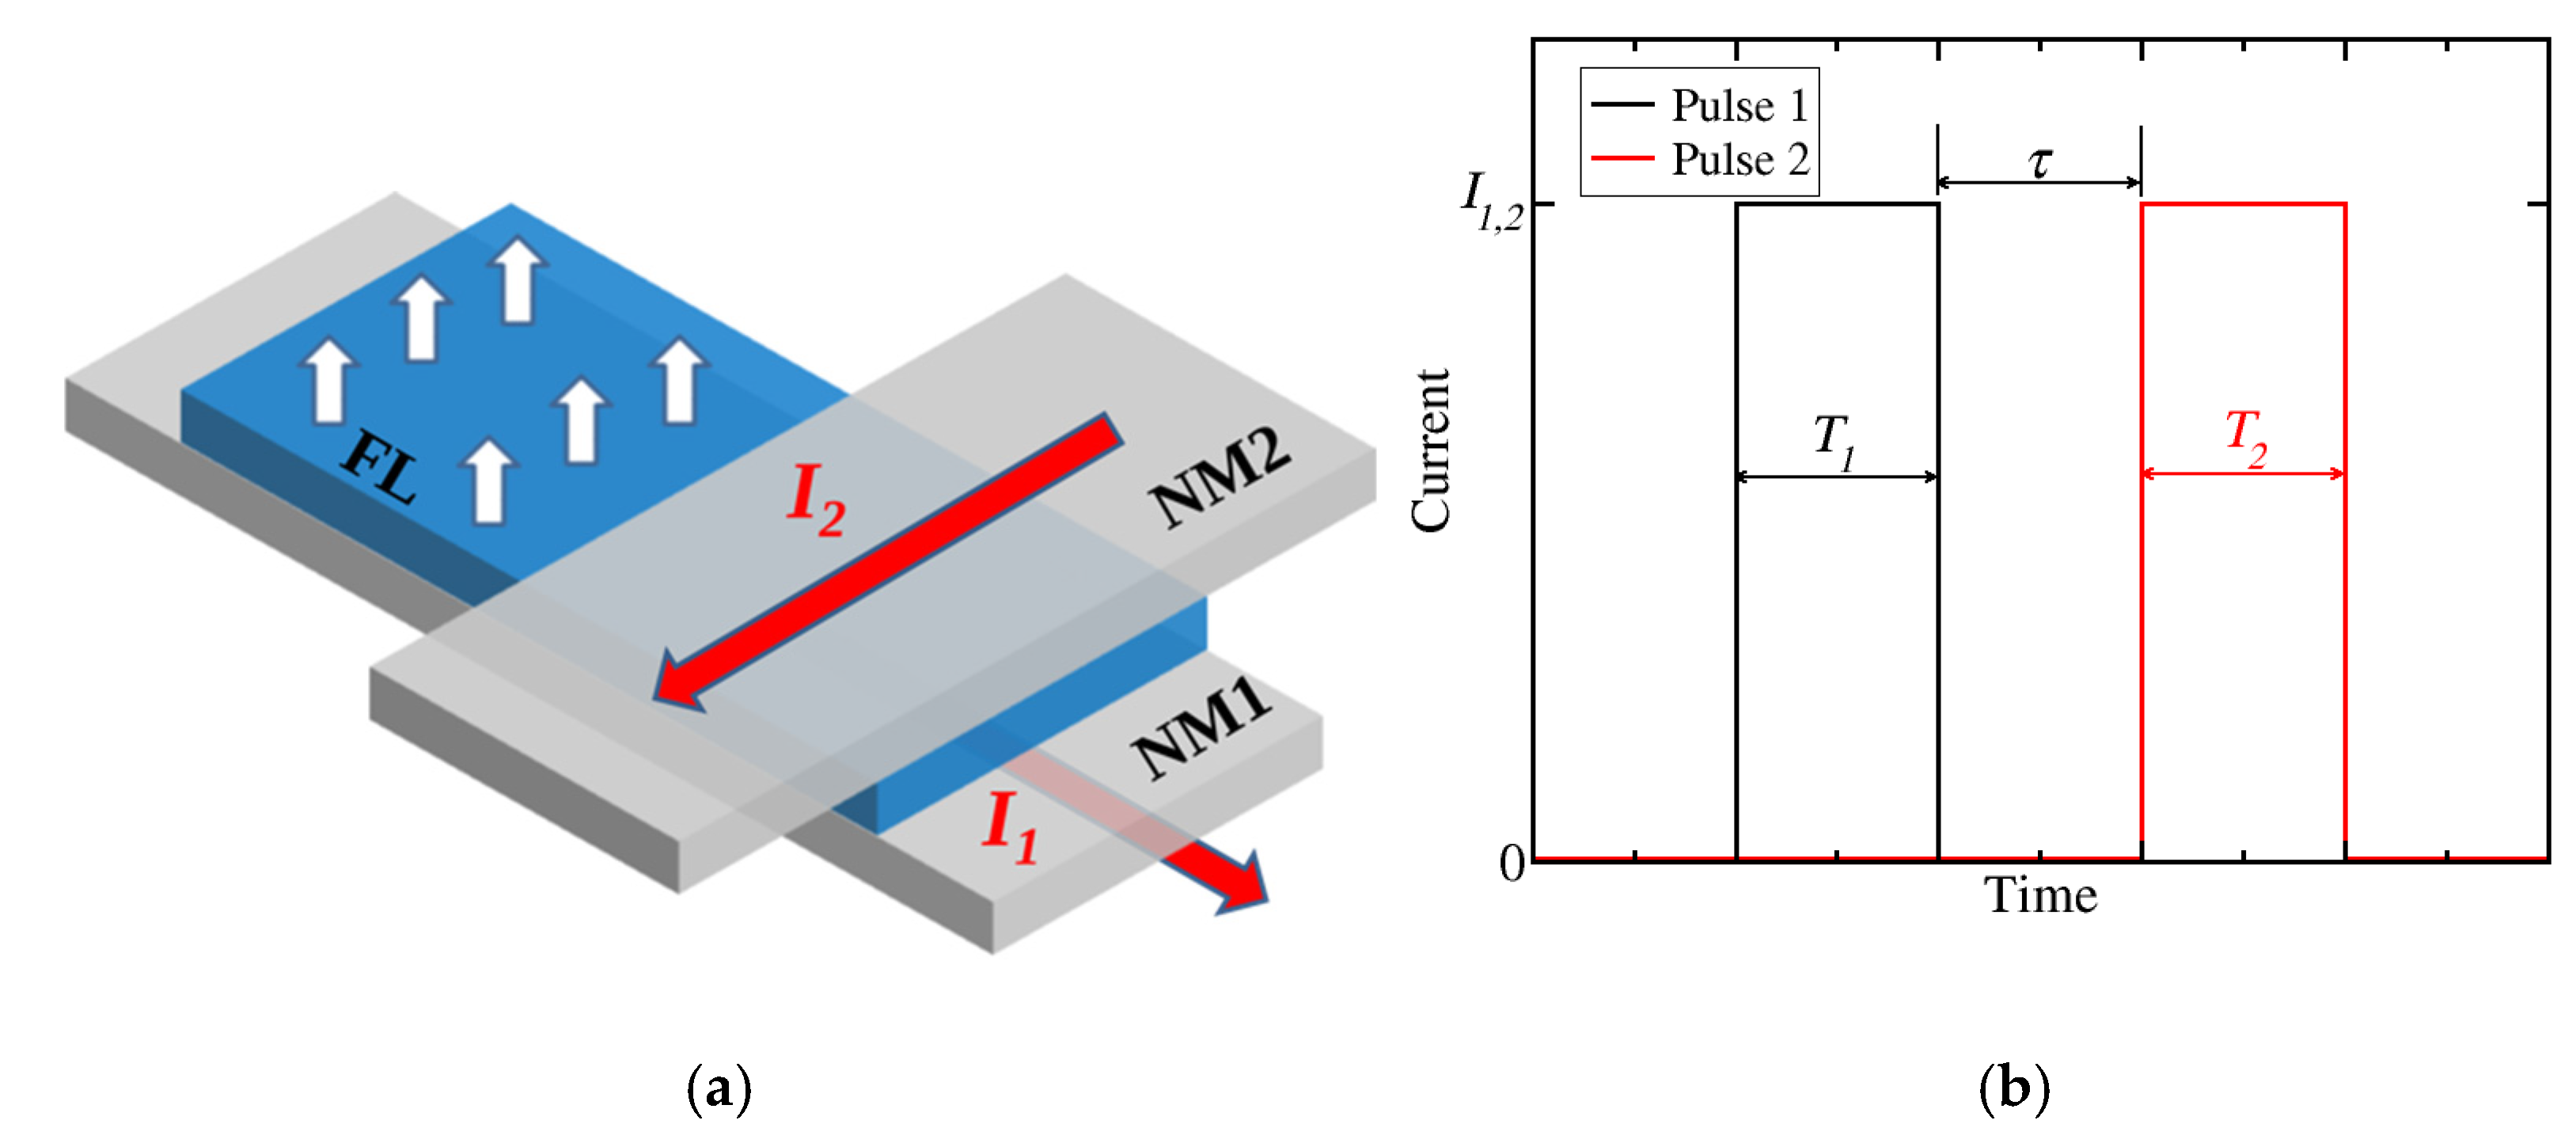 Micromachines | Free Full-Text | Optimization of a Spin-Orbit Torque  Switching Scheme Based on Micromagnetic Simulations and Reinforcement  Learning | HTML